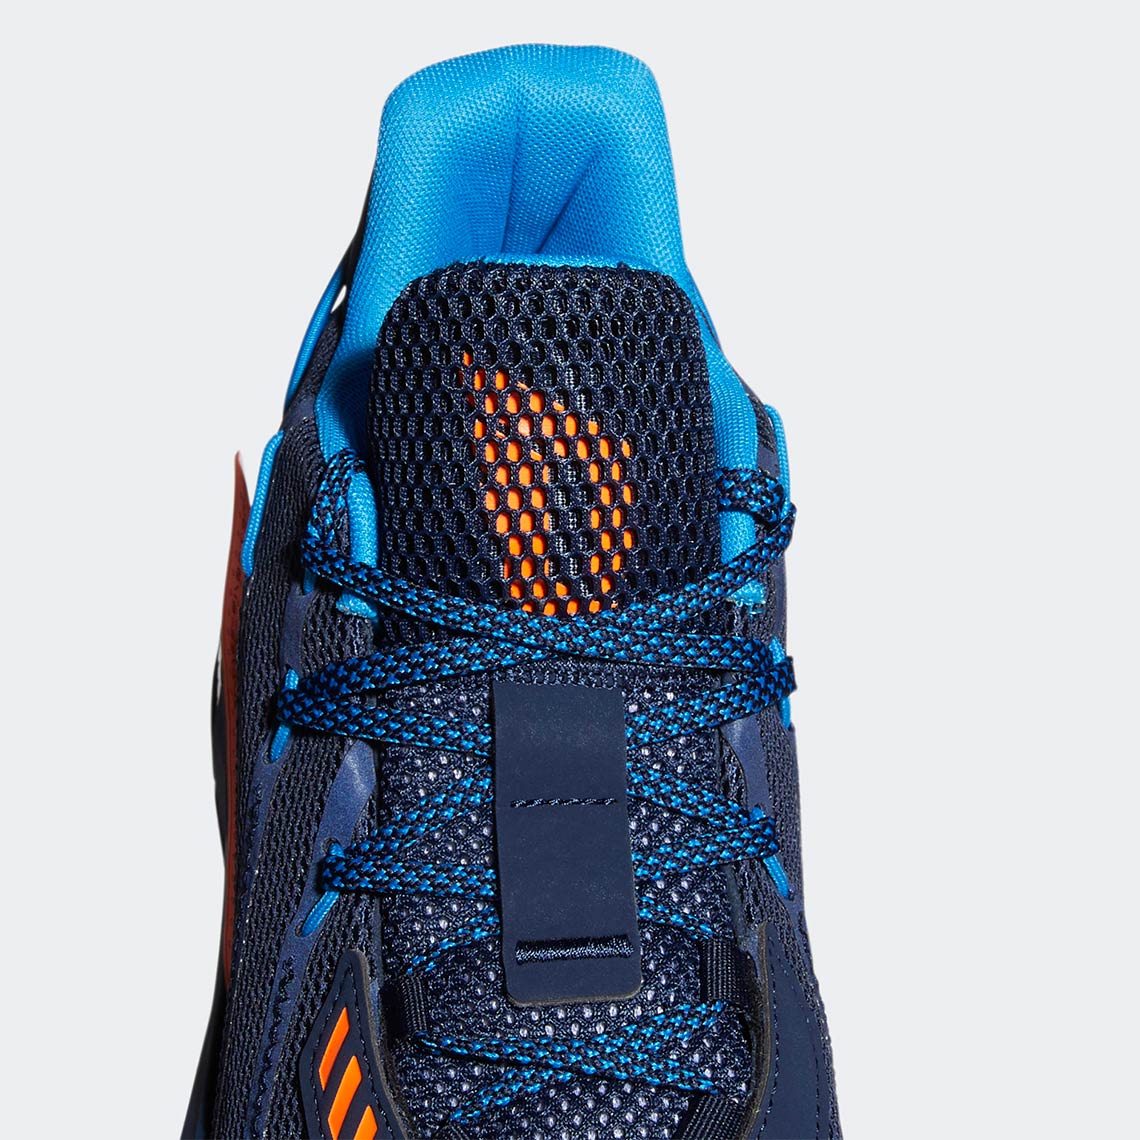 Adidas Dame 7 Lights Out Fz1103 Release Date 7